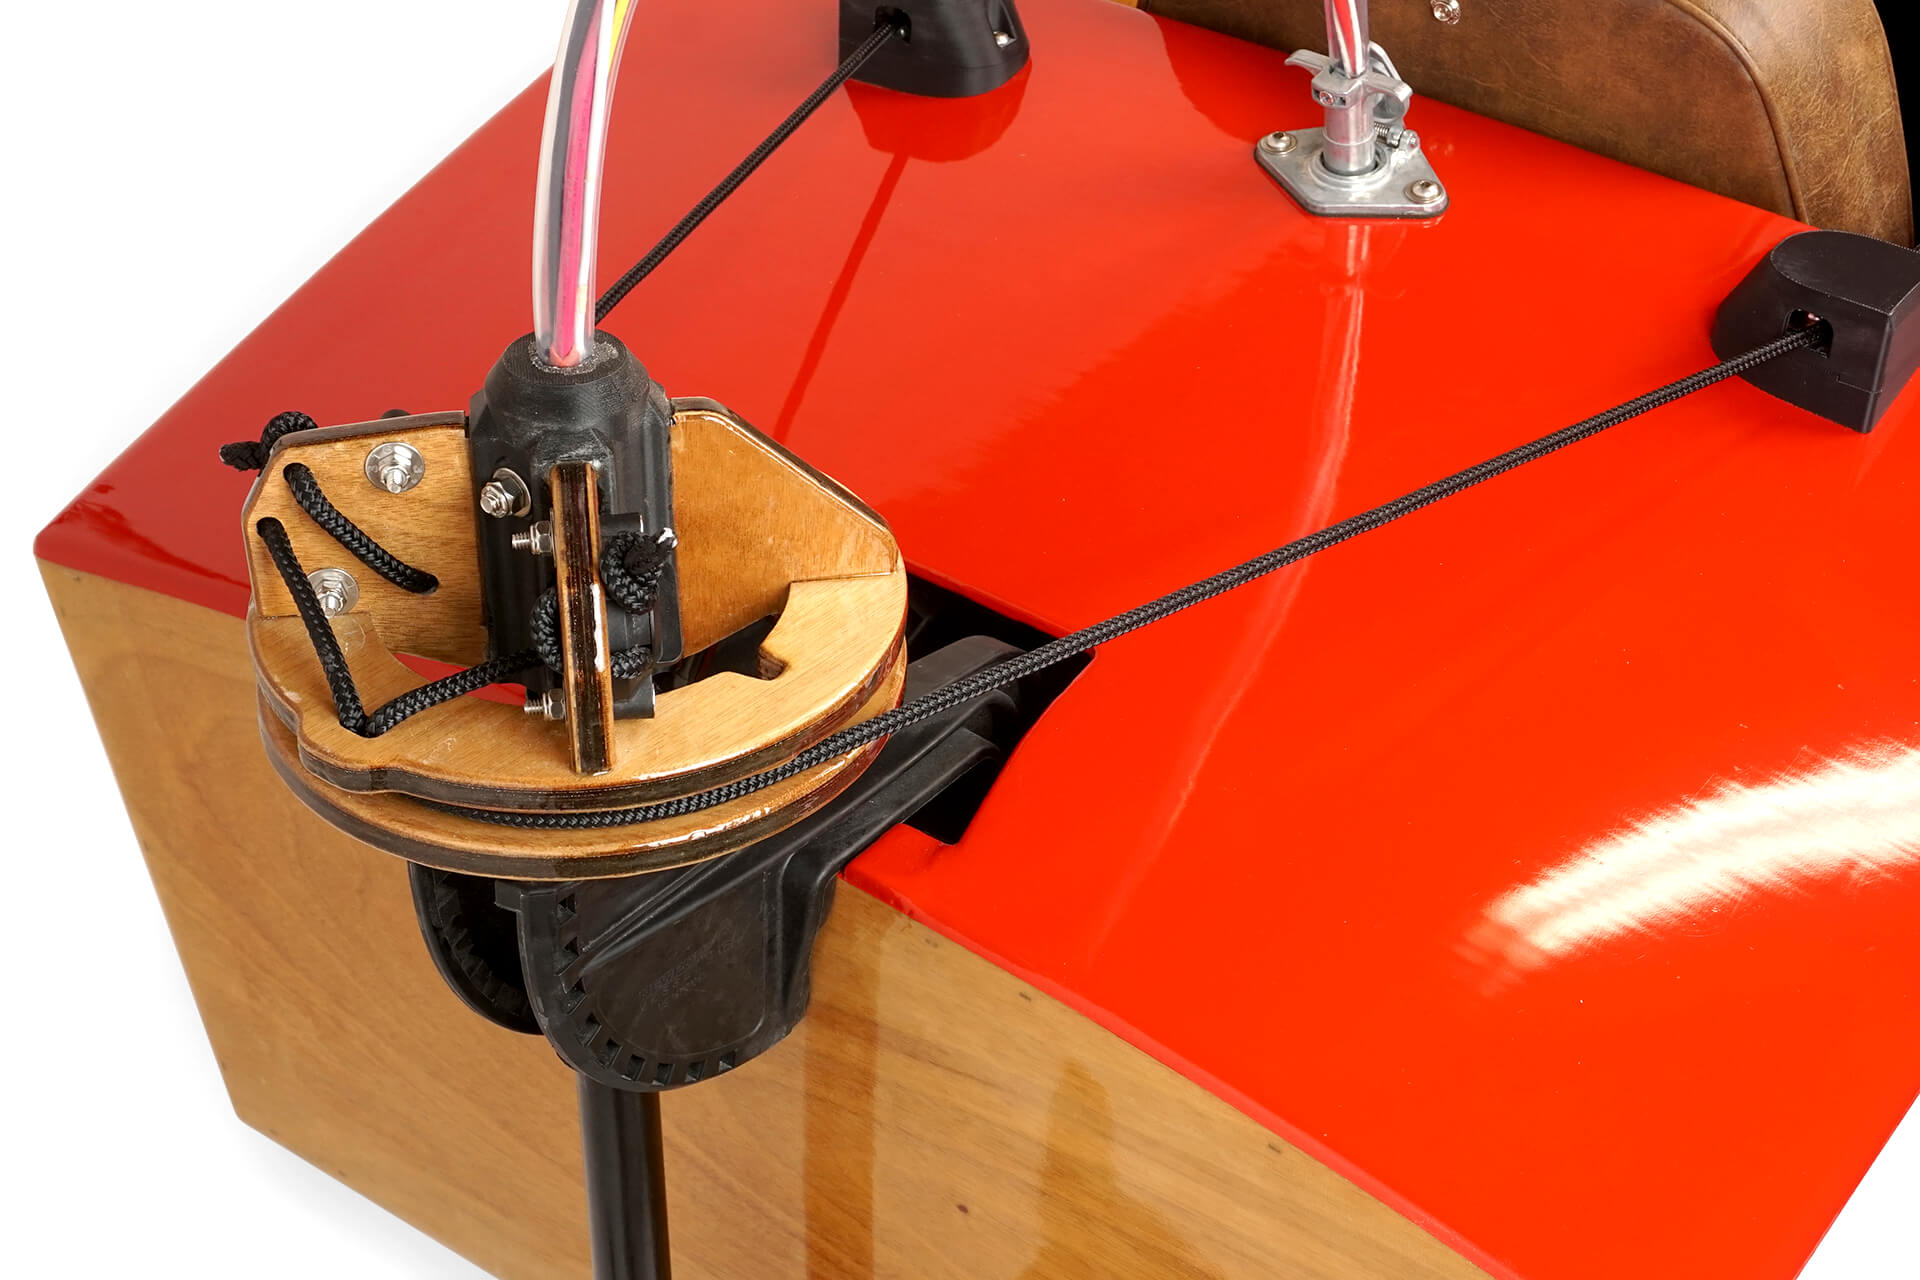 The steering drum and pulley system of the mini electric boat